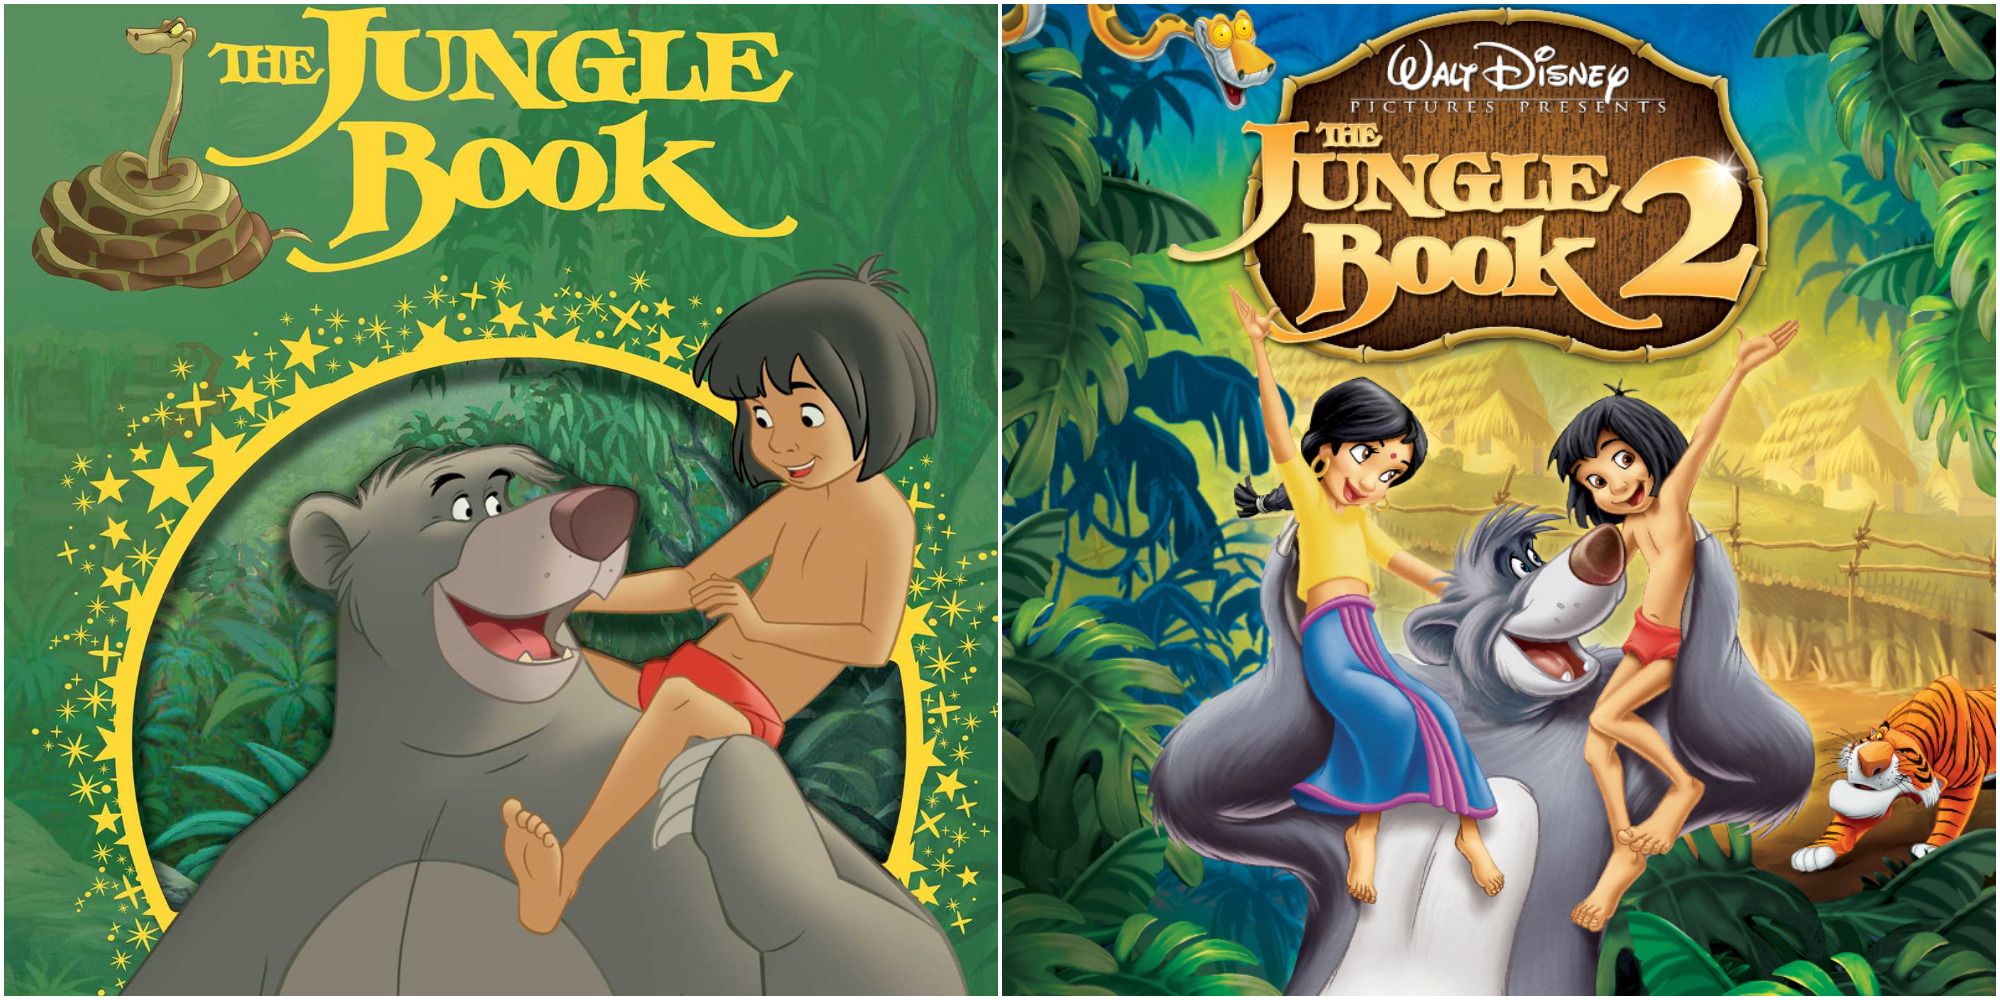 The Jungle Book 1 and 2 Covers